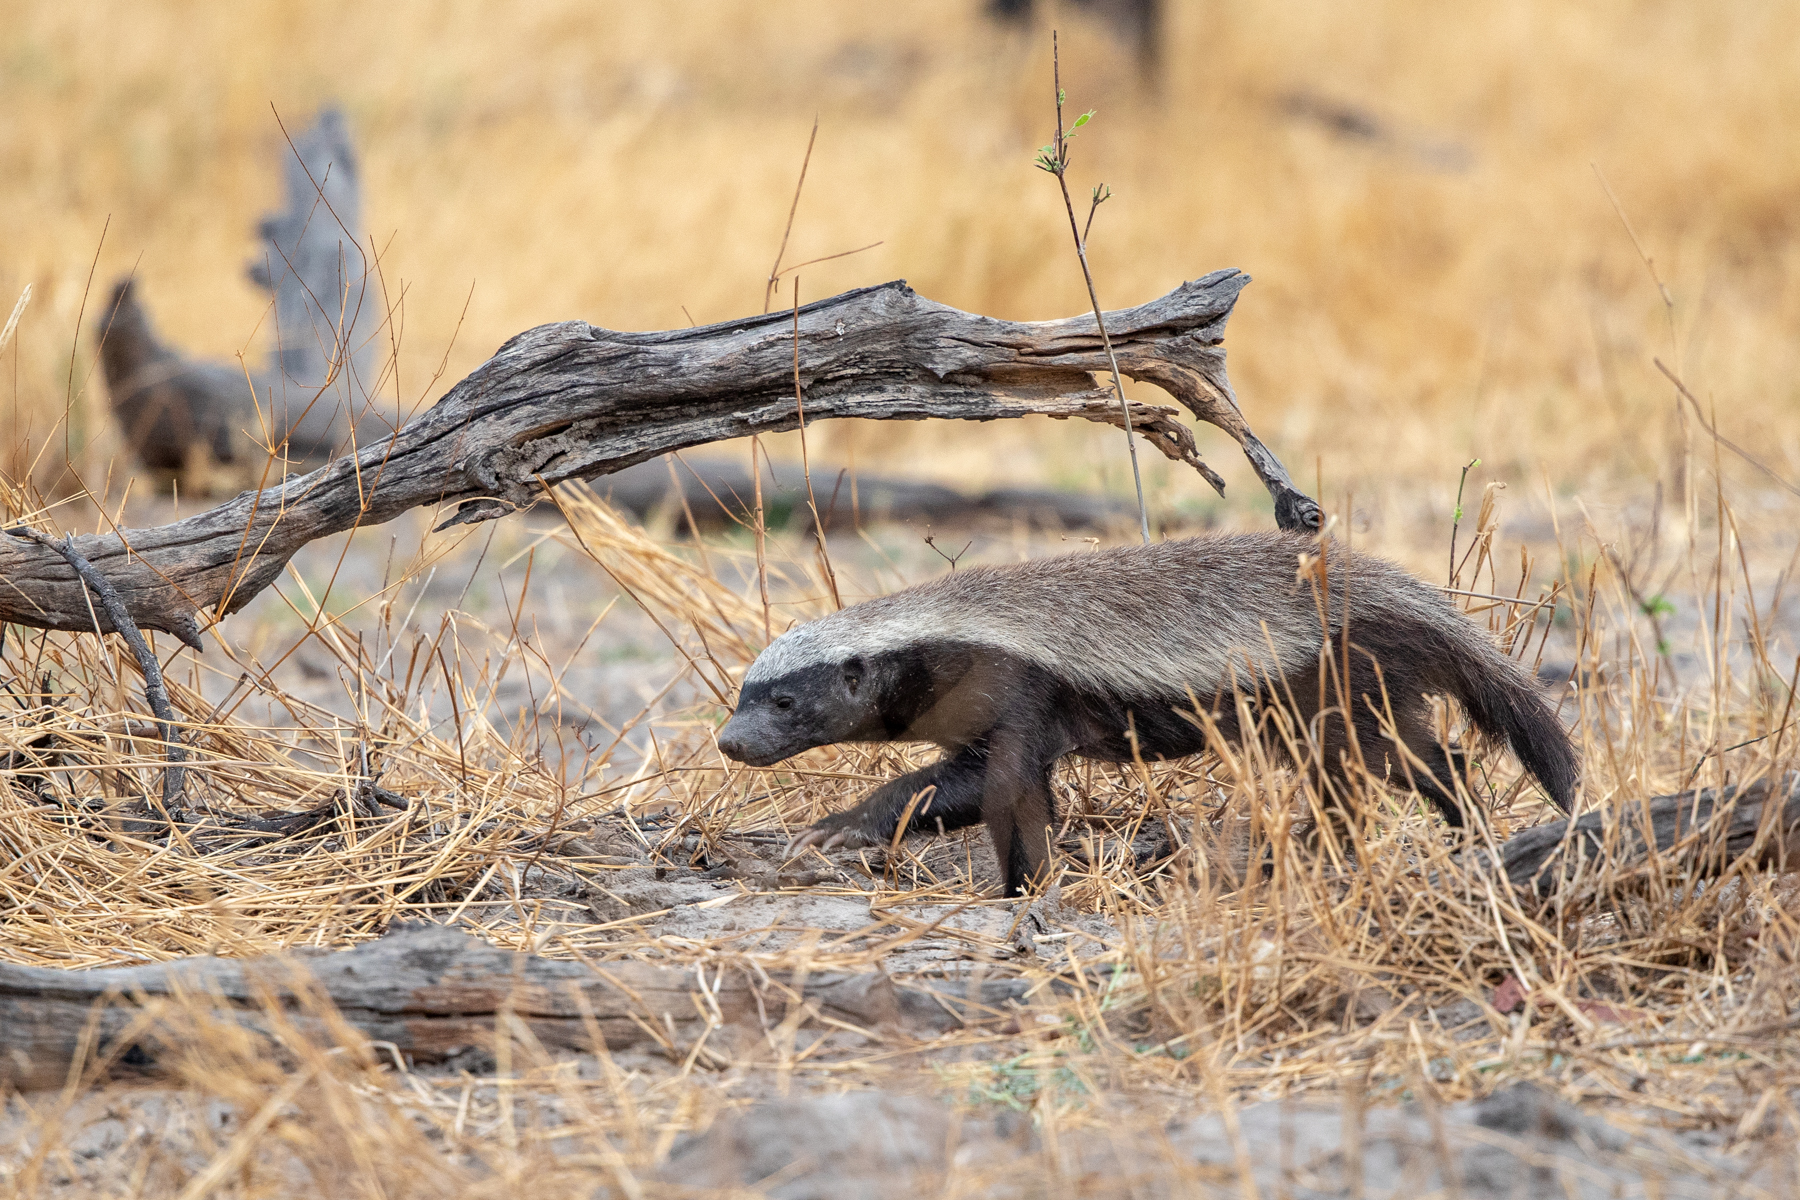 Honey Badgers may not be big, but they make up for it with remarkable strength and courage